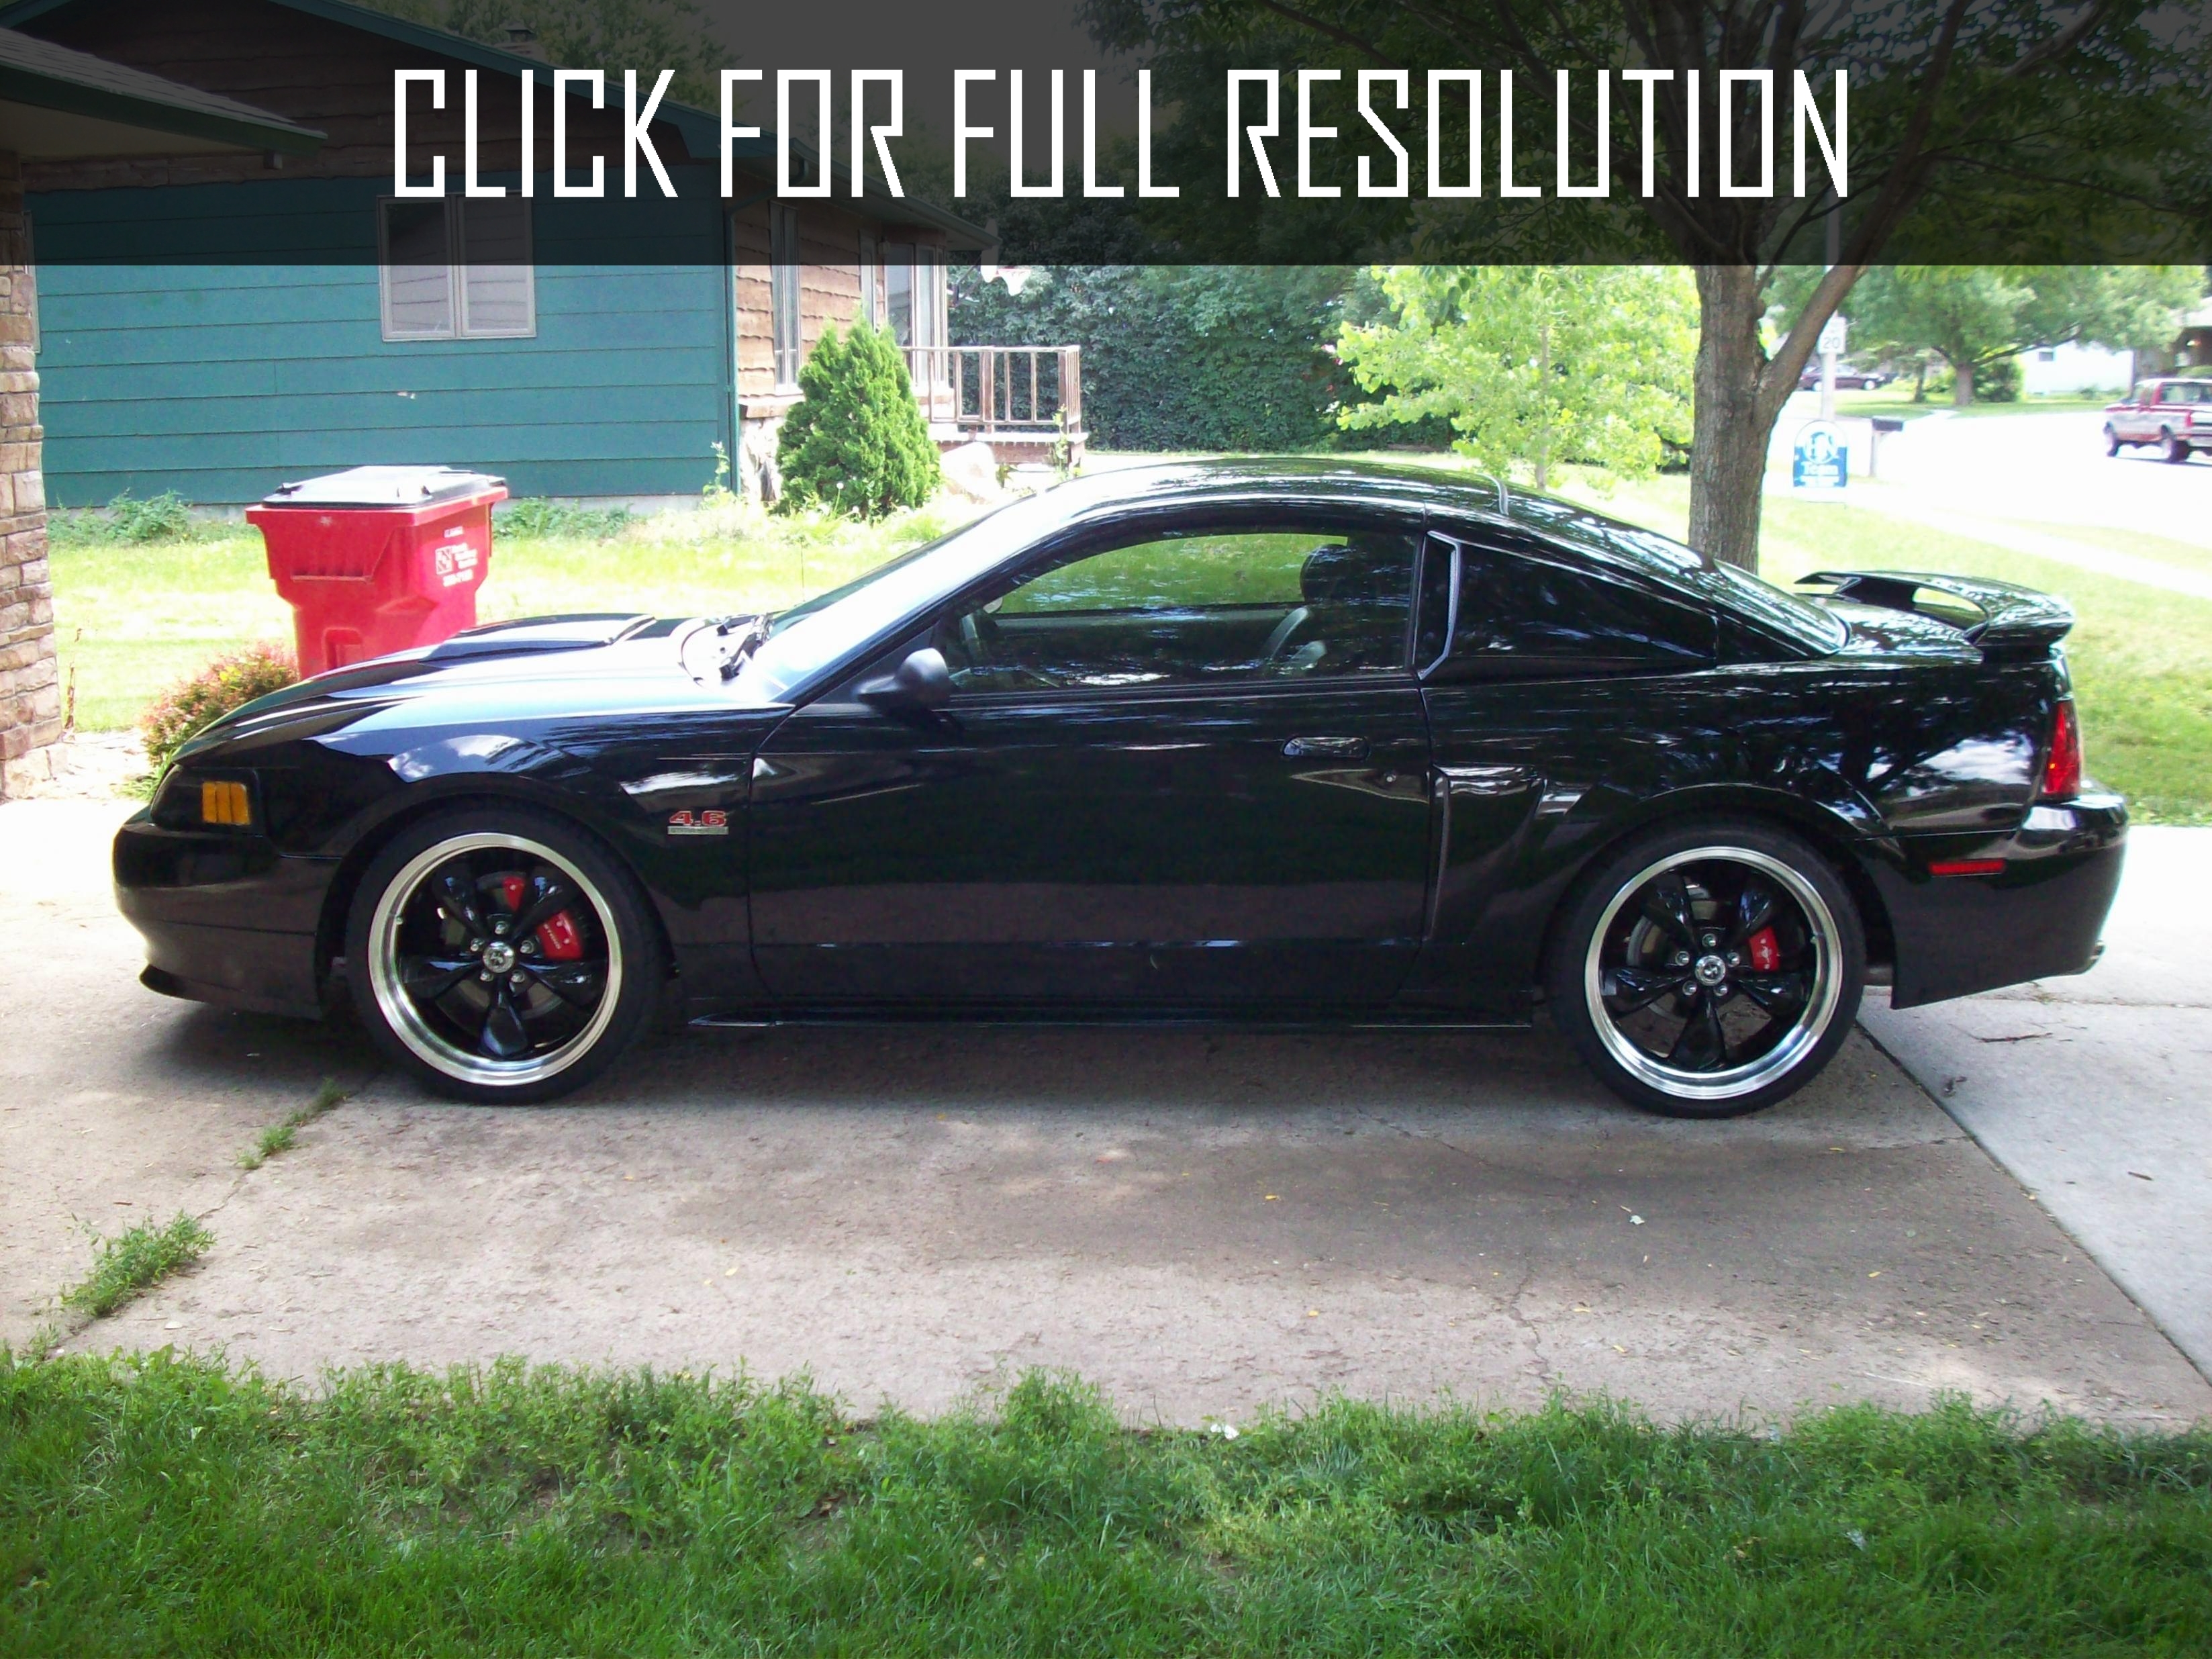 2003 Ford Mustang Gt